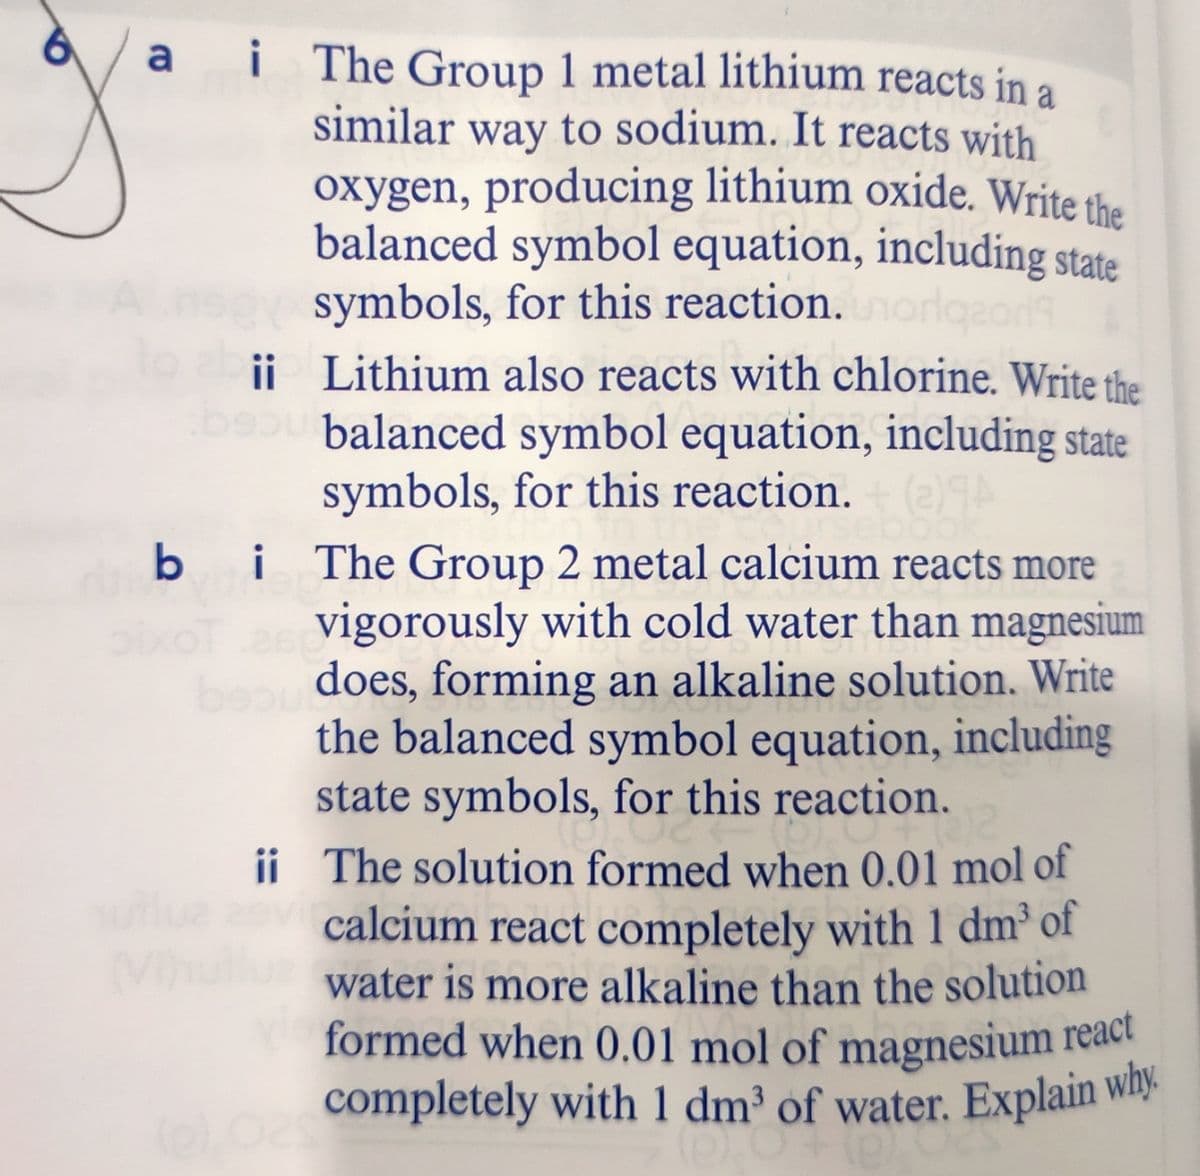 completely with 1 dm³ of water. Explain why.
formed when 0.01 mol of magnesium react
i
i The Group 1 metal lithium reacts in a
similar way to sodium. It reacts with
a
oxygen, producing lithium oxide. Write the
balanced symbol equation, including state
symbols, for this reaction.
ii Lithium also reacts with chlorine. Write the
be balanced symbol equation, including state
symbols, for this reaction.
i The Group 2 metal calcium reacts more
vigorously with cold water than magnesium
does, forming an alkaline solution. Write
the balanced symbol equation, including
state symbols, for this reaction.
b i
ii The solution formed when 0.01 mol of
calcium react completely with 1 dm³ of
water is more alkaline than the solution
